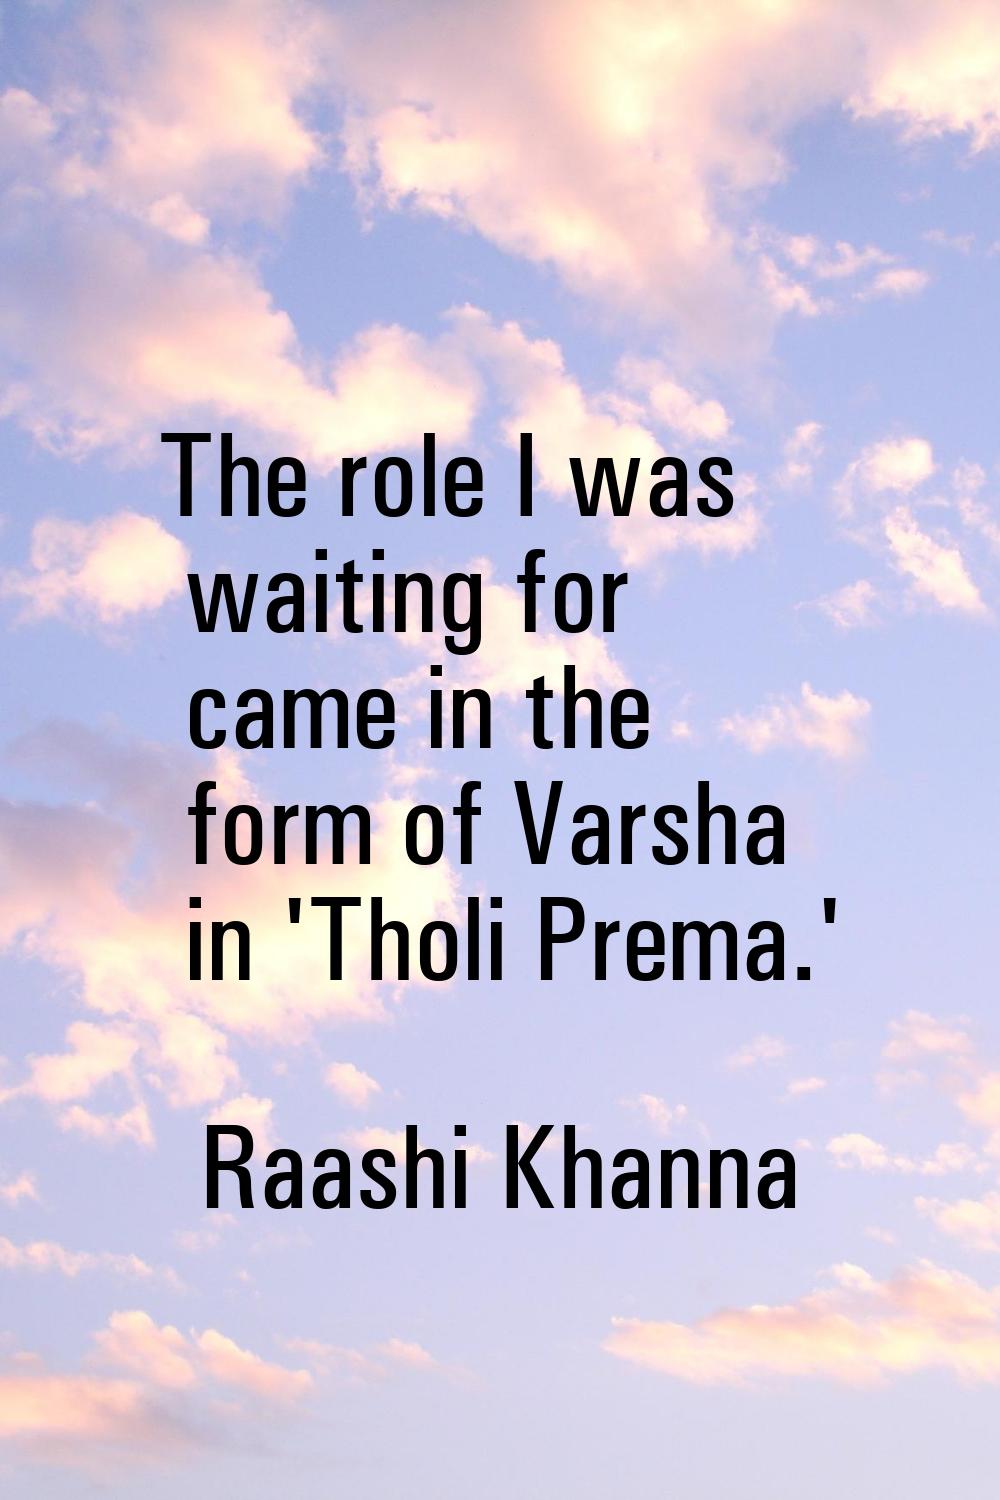 The role I was waiting for came in the form of Varsha in 'Tholi Prema.'